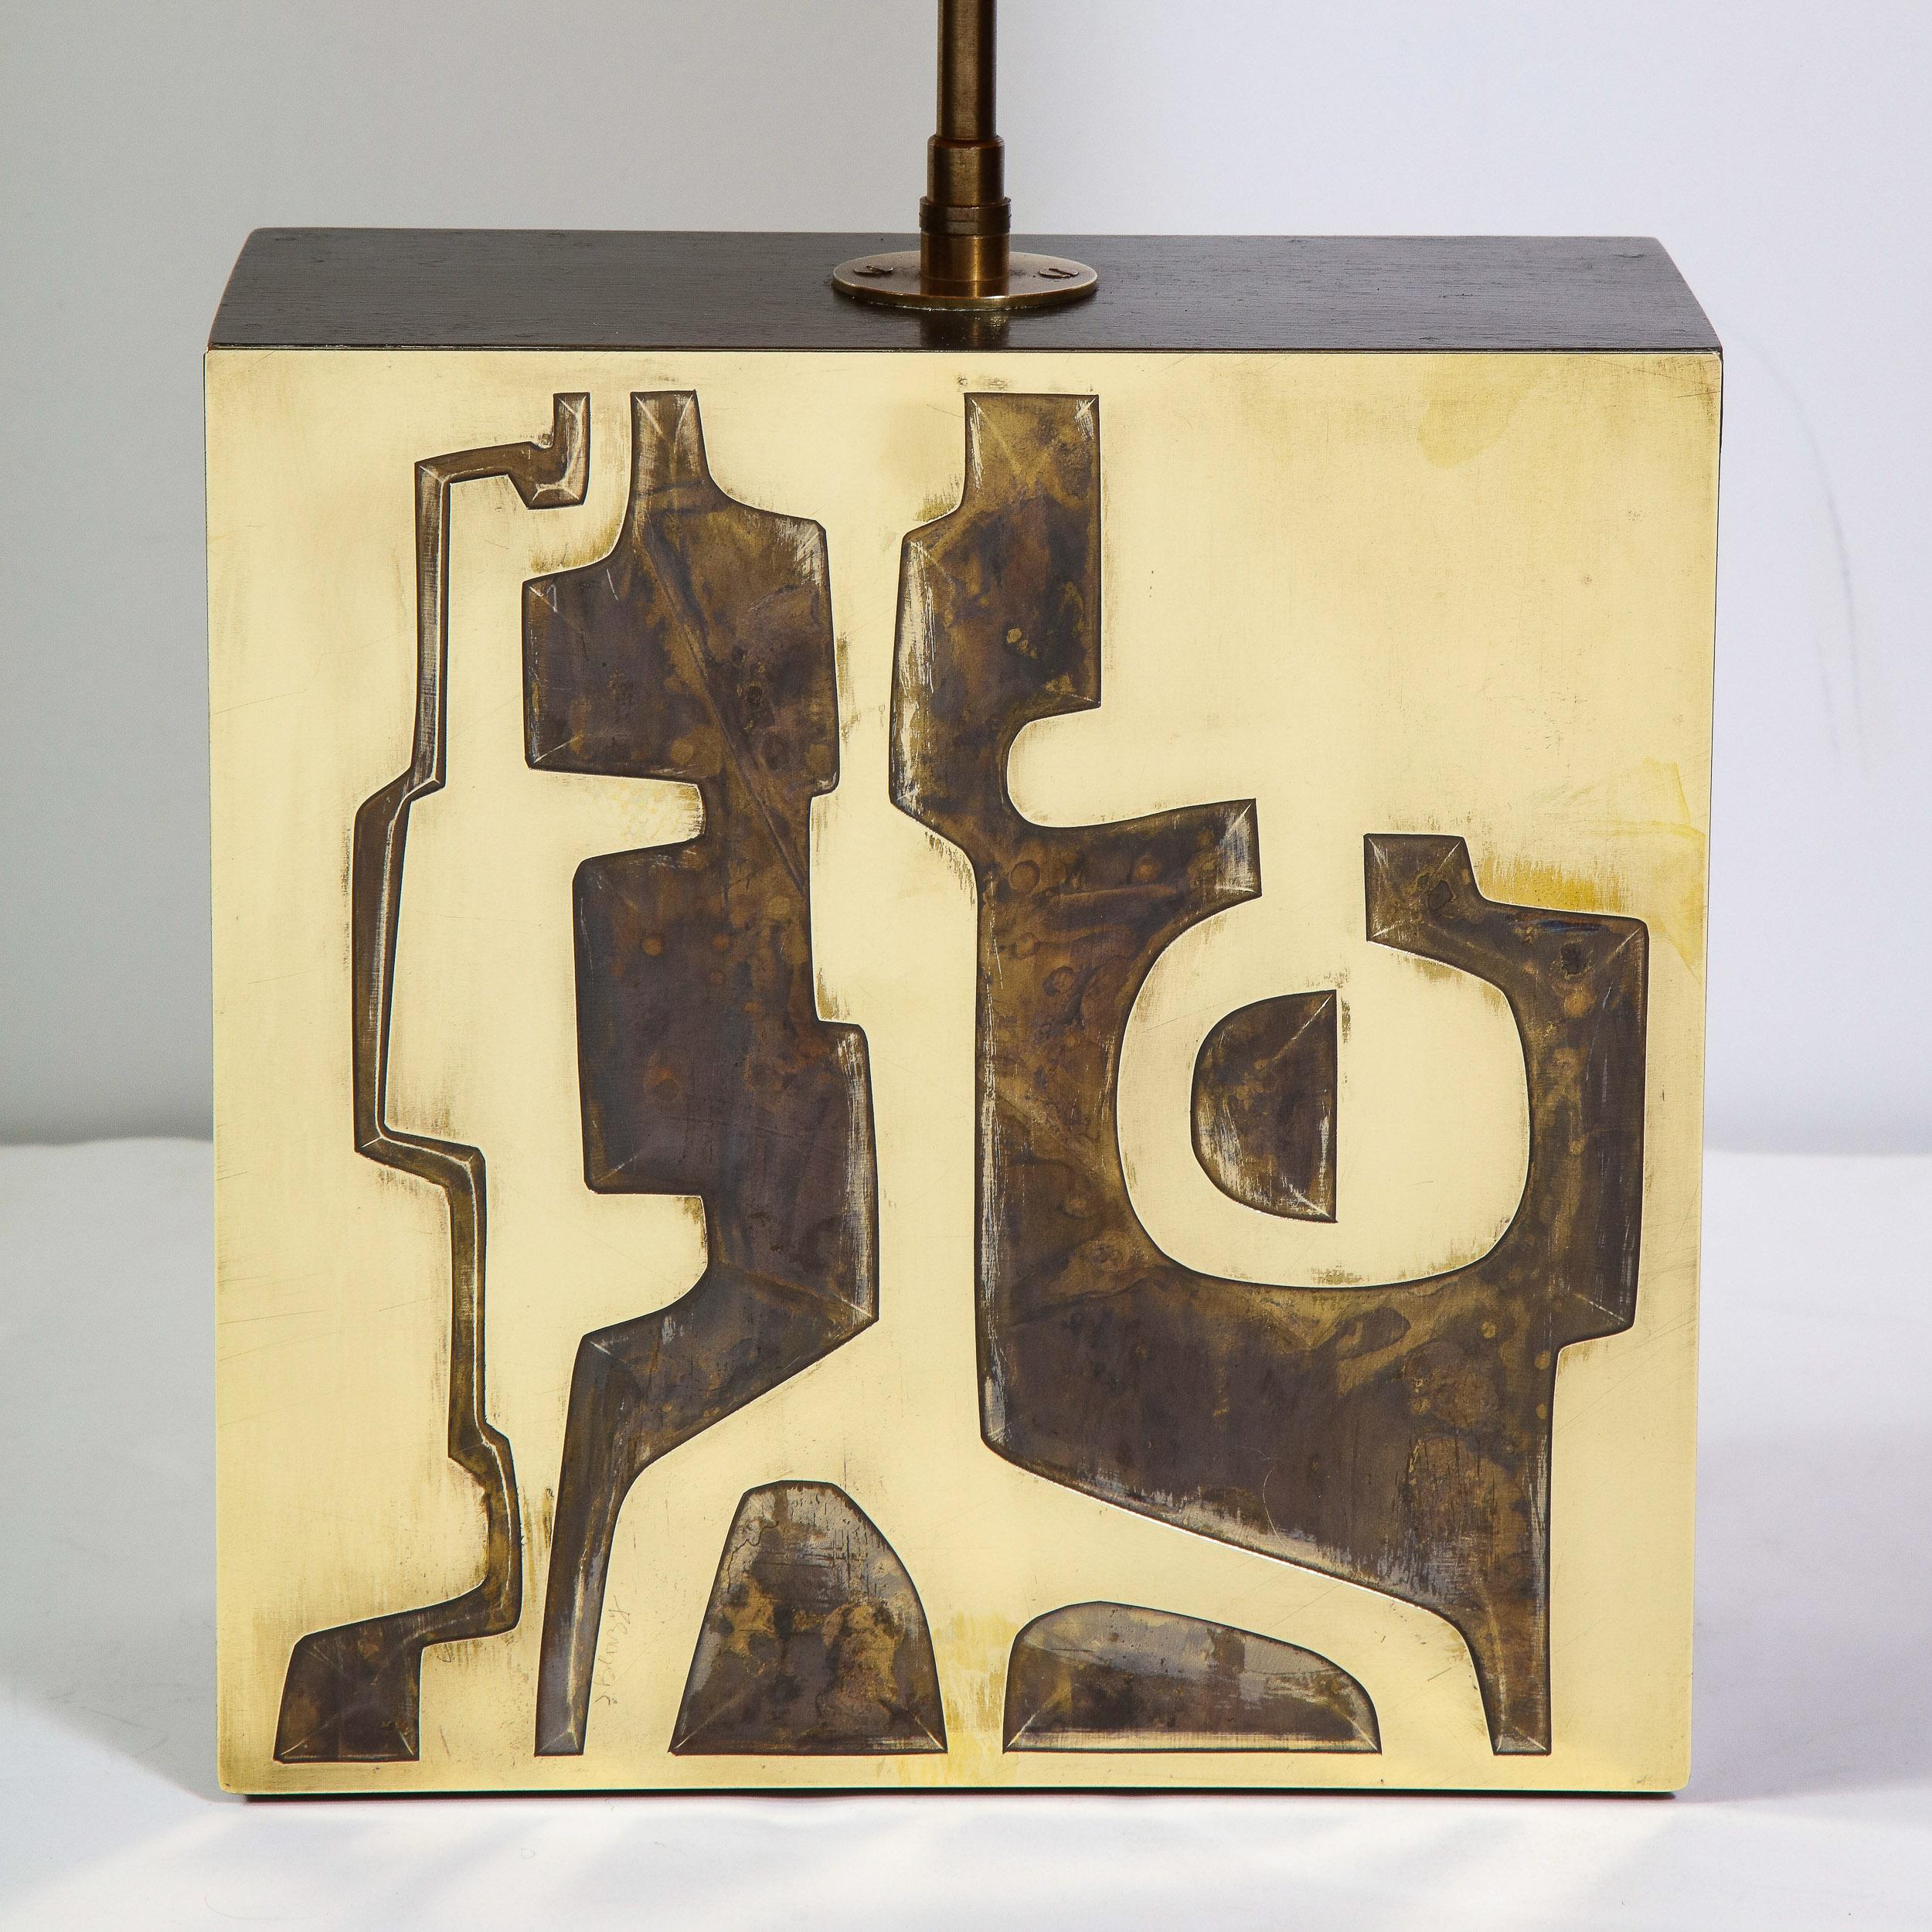 This refined Mid-Century Modern Brutalist brass lamp was realized in the Untied states, circa 1960. It offers a volumetric rectangular body with an abstract petroglyphic design etched in the surface. The vellum lamp shade has been hand painted by